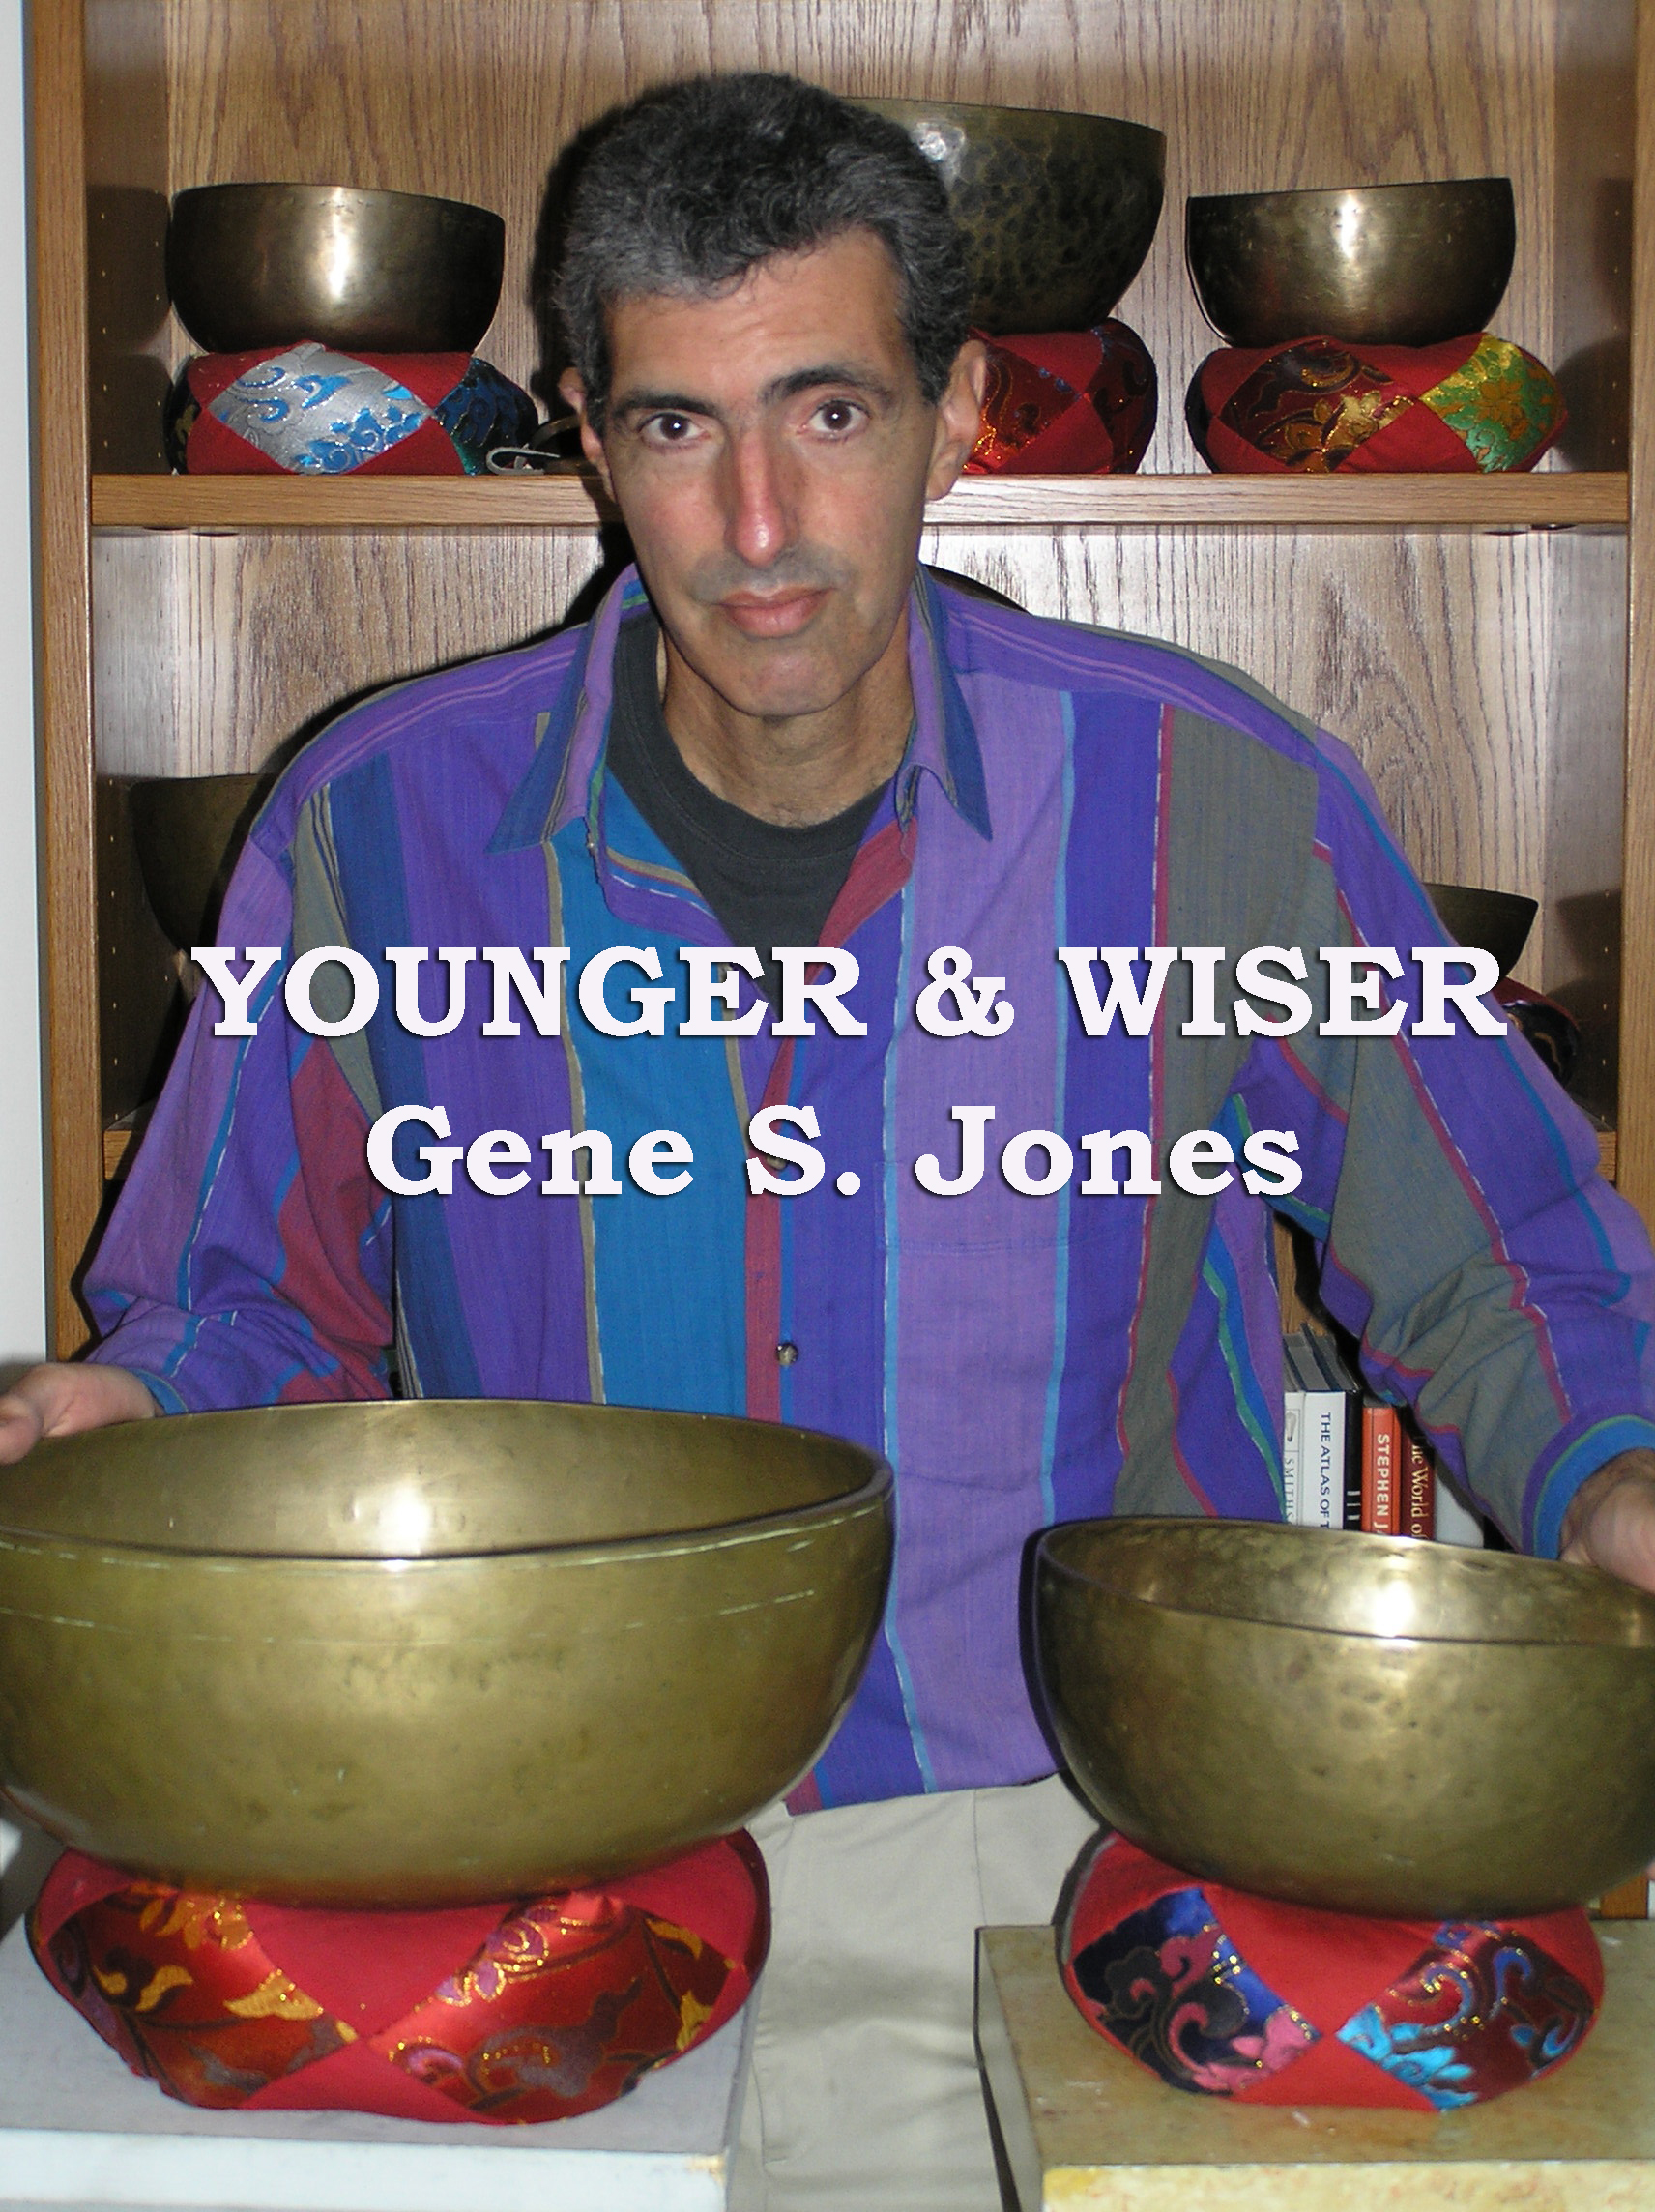 Poetry Reading by sound healer Gene S. Jones from his book Younger and Wiser